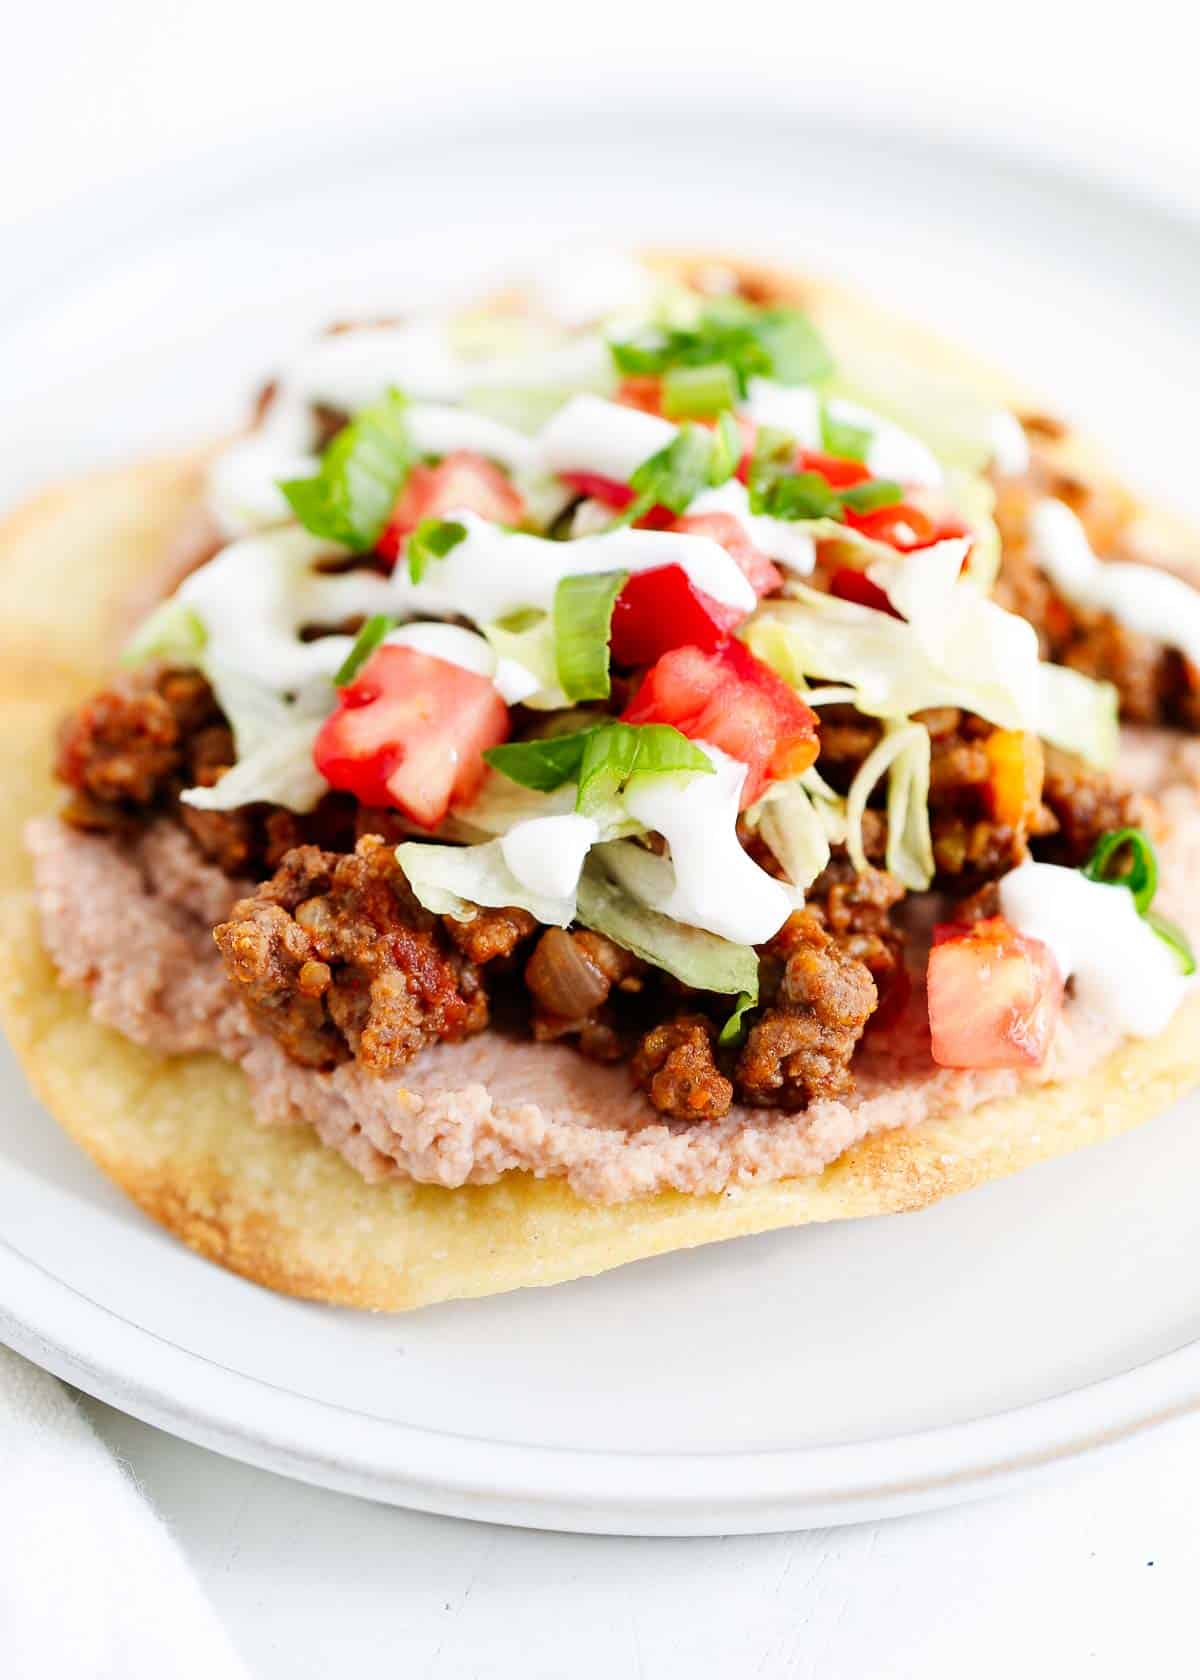 Tostada recipe on a white plate.